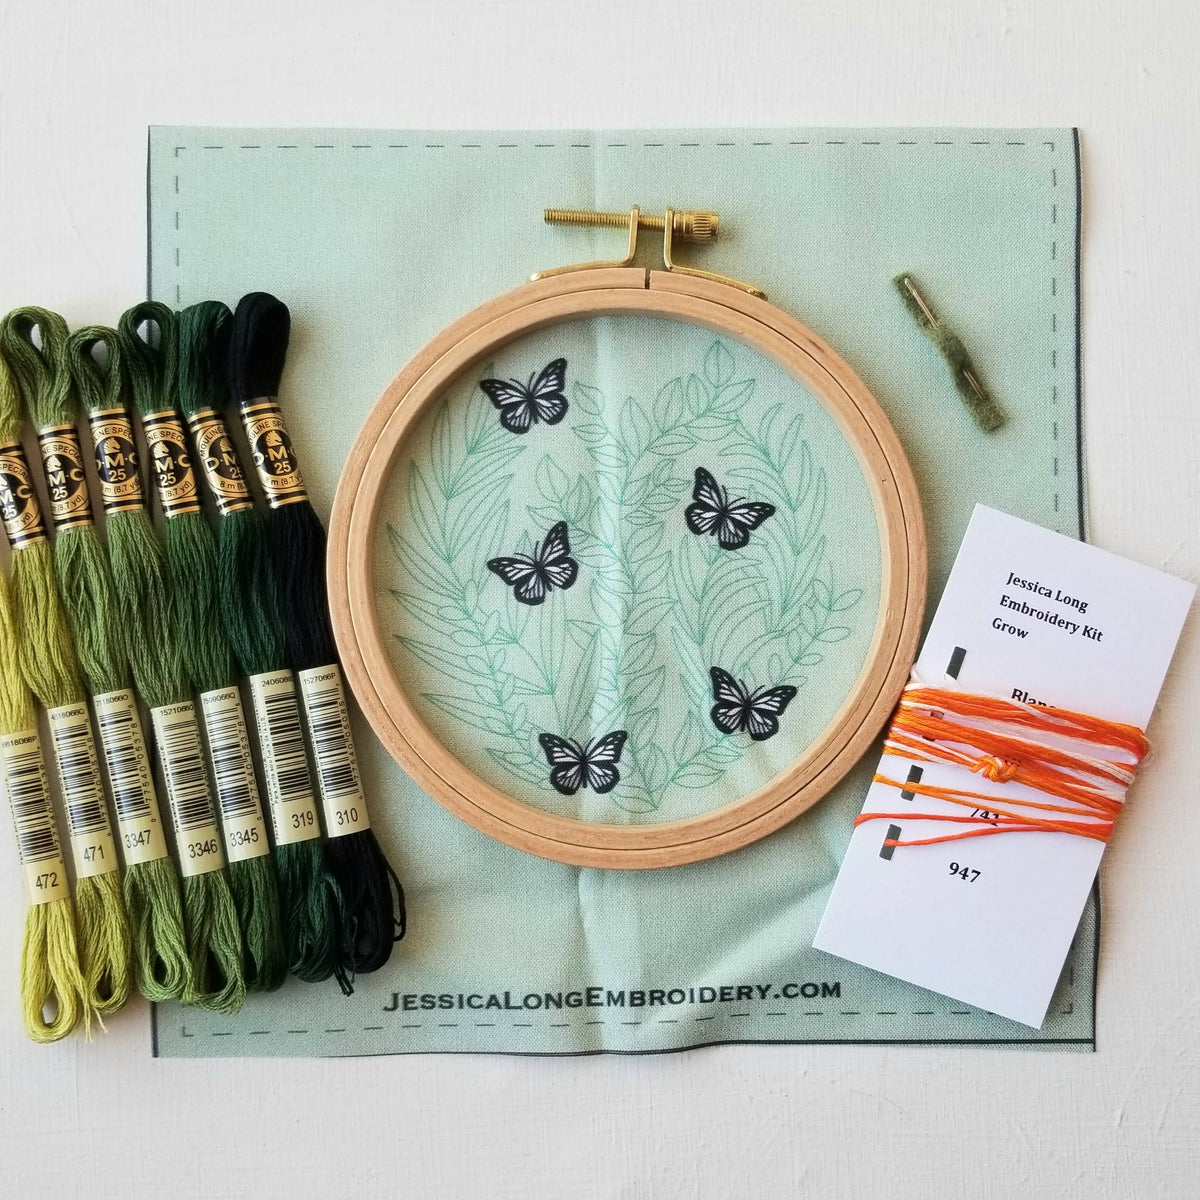 Jessica Long Embroidery "Love Grows" butterfly hand embroidery kit